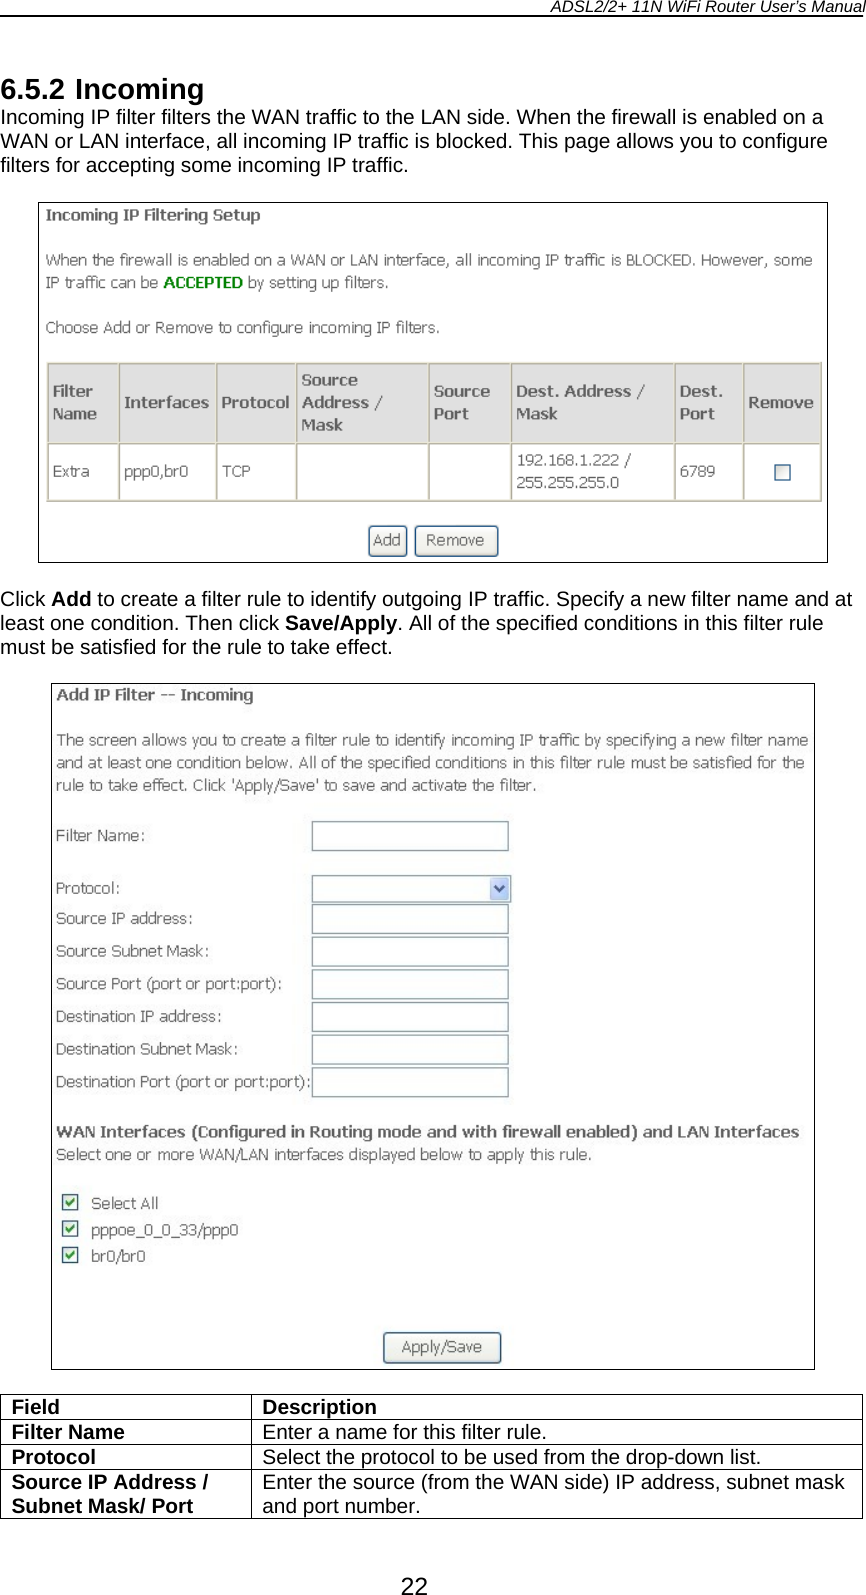 ADSL2/2+ 11N WiFi Router User’s Manual  22 6.5.2 Incoming Incoming IP filter filters the WAN traffic to the LAN side. When the firewall is enabled on a WAN or LAN interface, all incoming IP traffic is blocked. This page allows you to configure filters for accepting some incoming IP traffic.    Click Add to create a filter rule to identify outgoing IP traffic. Specify a new filter name and at least one condition. Then click Save/Apply. All of the specified conditions in this filter rule must be satisfied for the rule to take effect.    Field Description Filter Name  Enter a name for this filter rule. Protocol  Select the protocol to be used from the drop-down list. Source IP Address / Subnet Mask/ Port  Enter the source (from the WAN side) IP address, subnet mask and port number. 